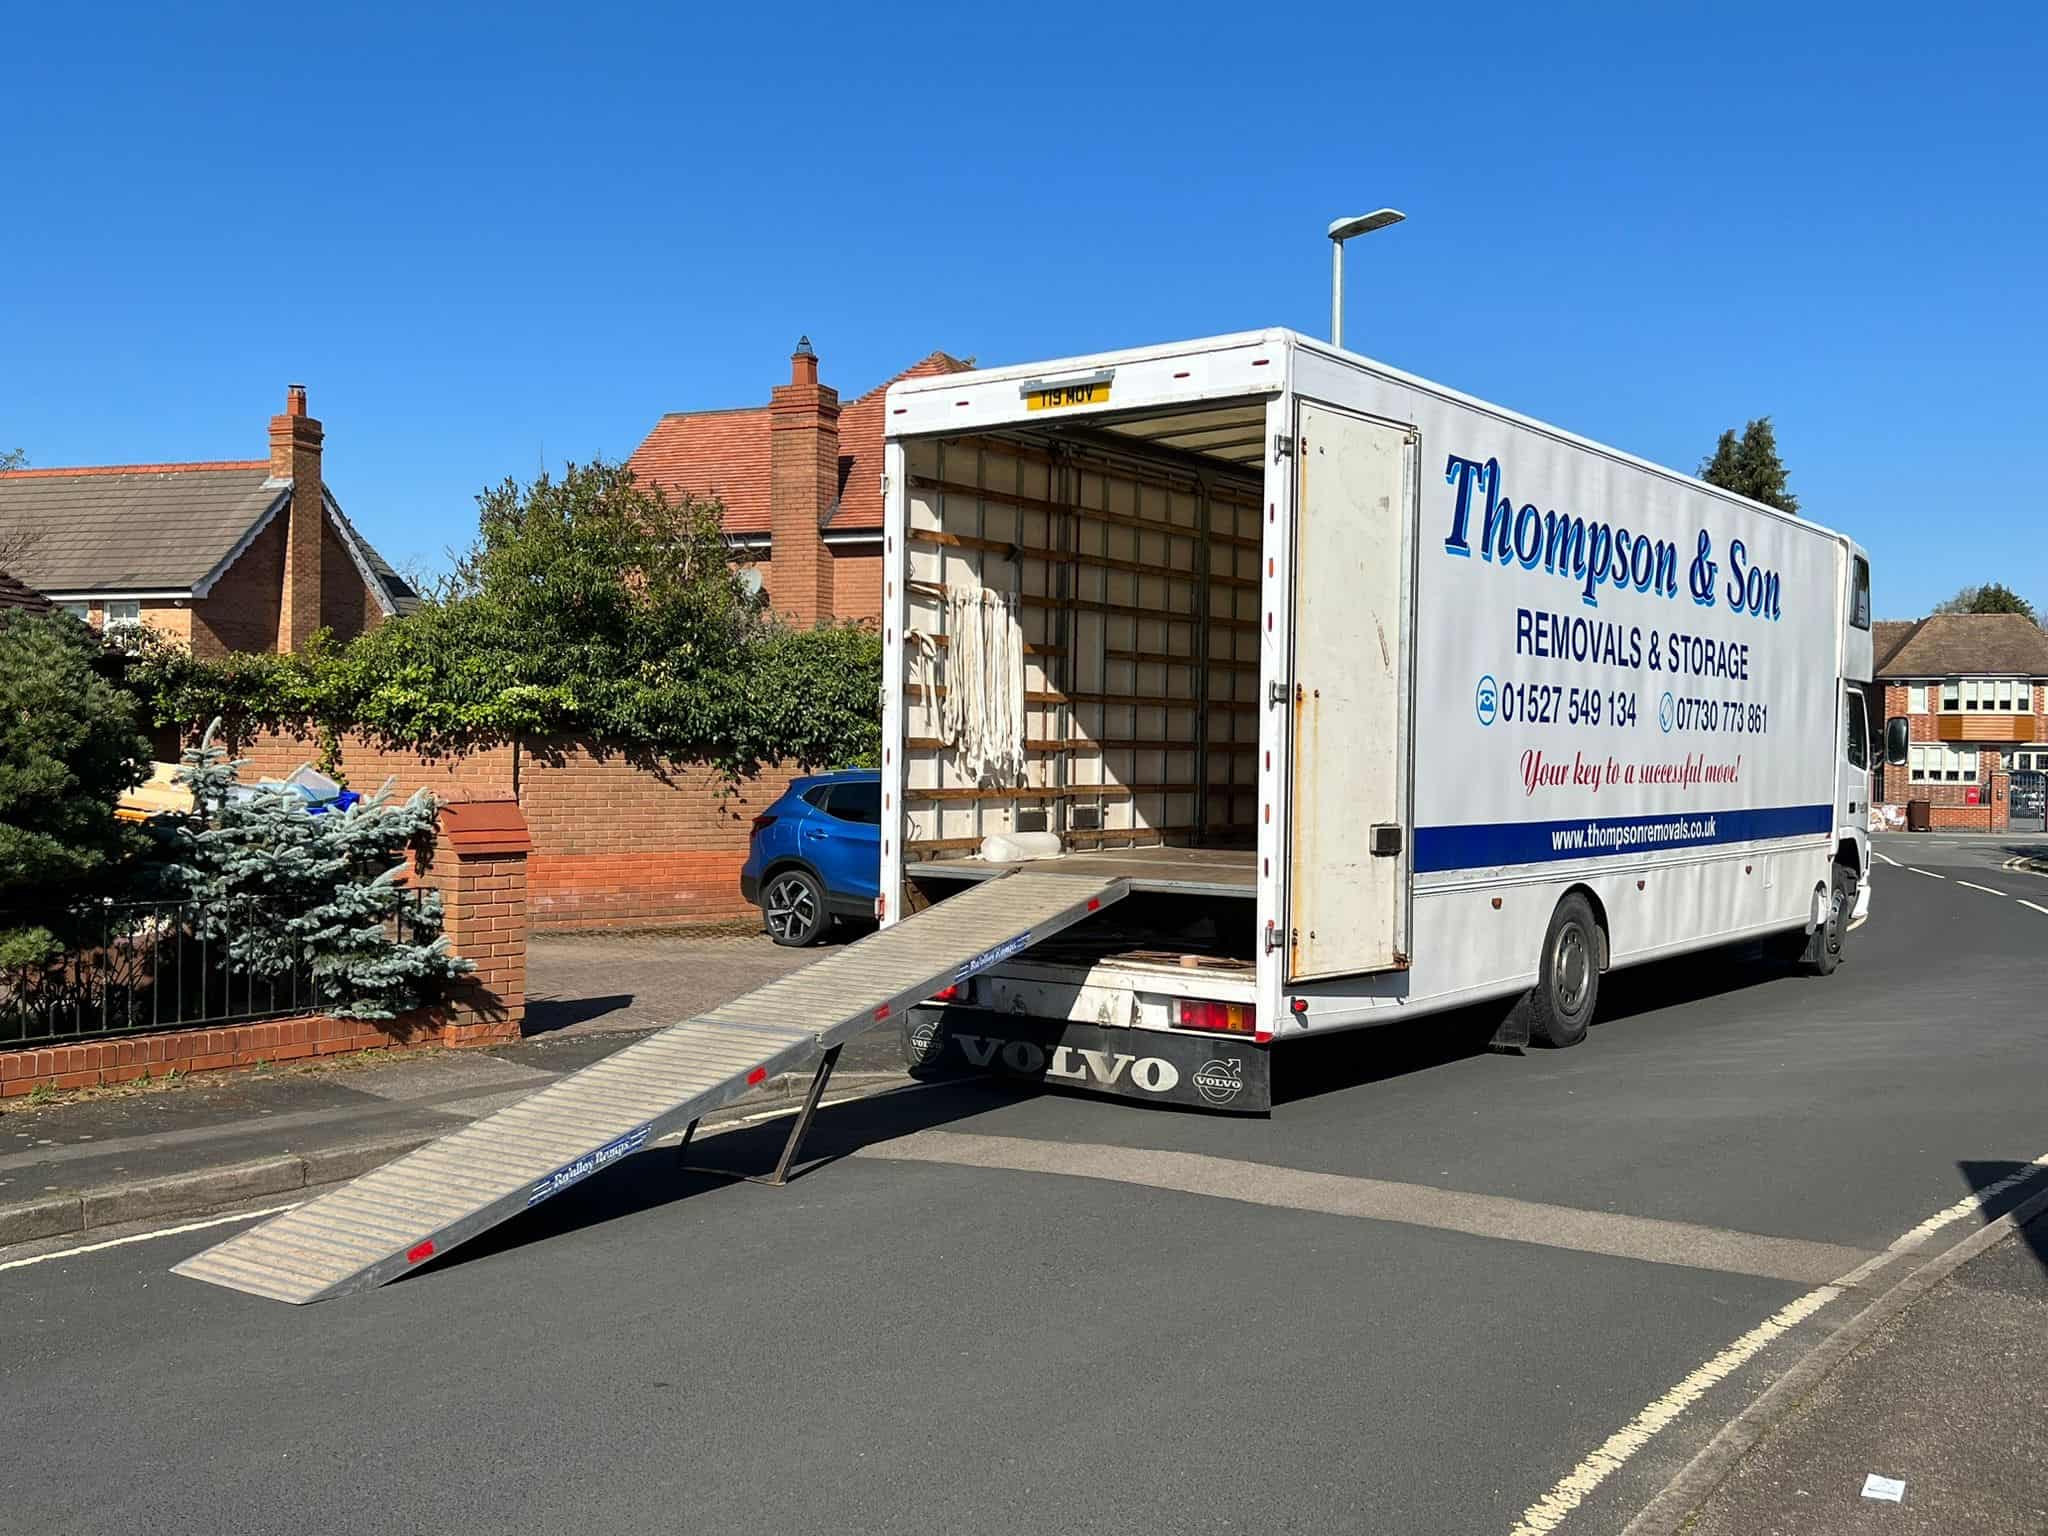 Thompson &Amp; Son Local House Removals - Evesham, Sutton Coldfield, Birmingham And Surrounding Areas